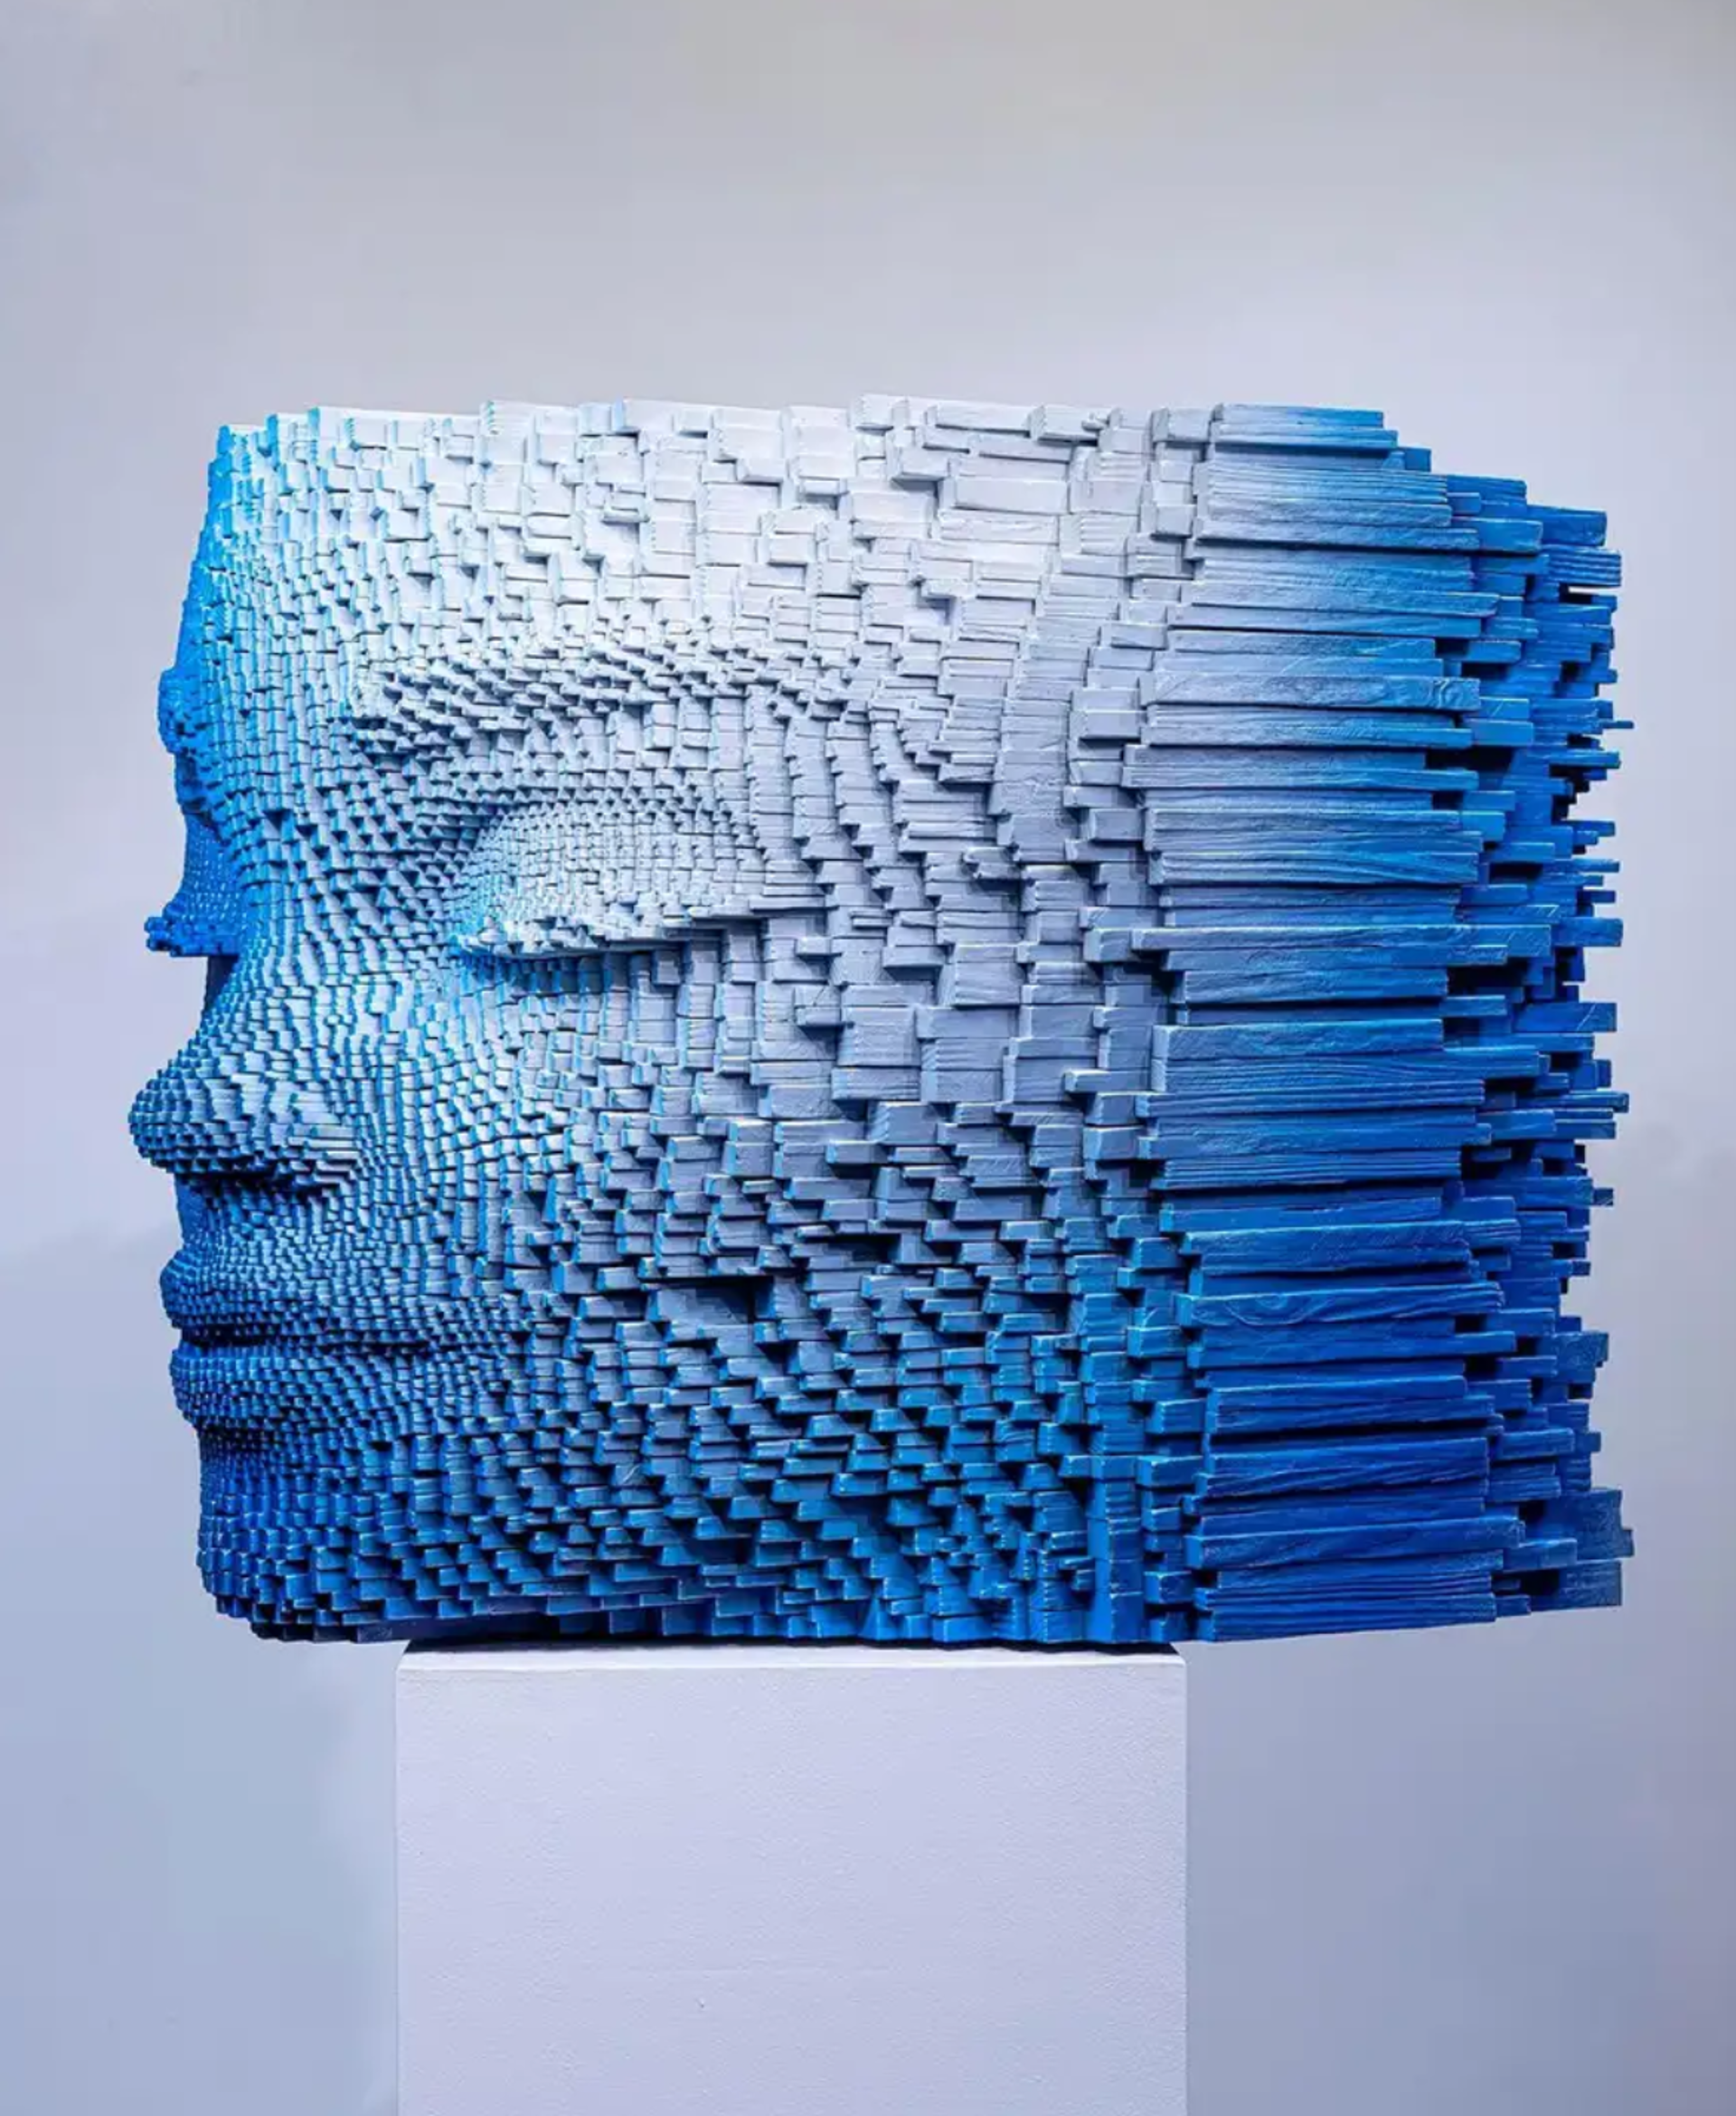 Rising Star by Gil Bruvel